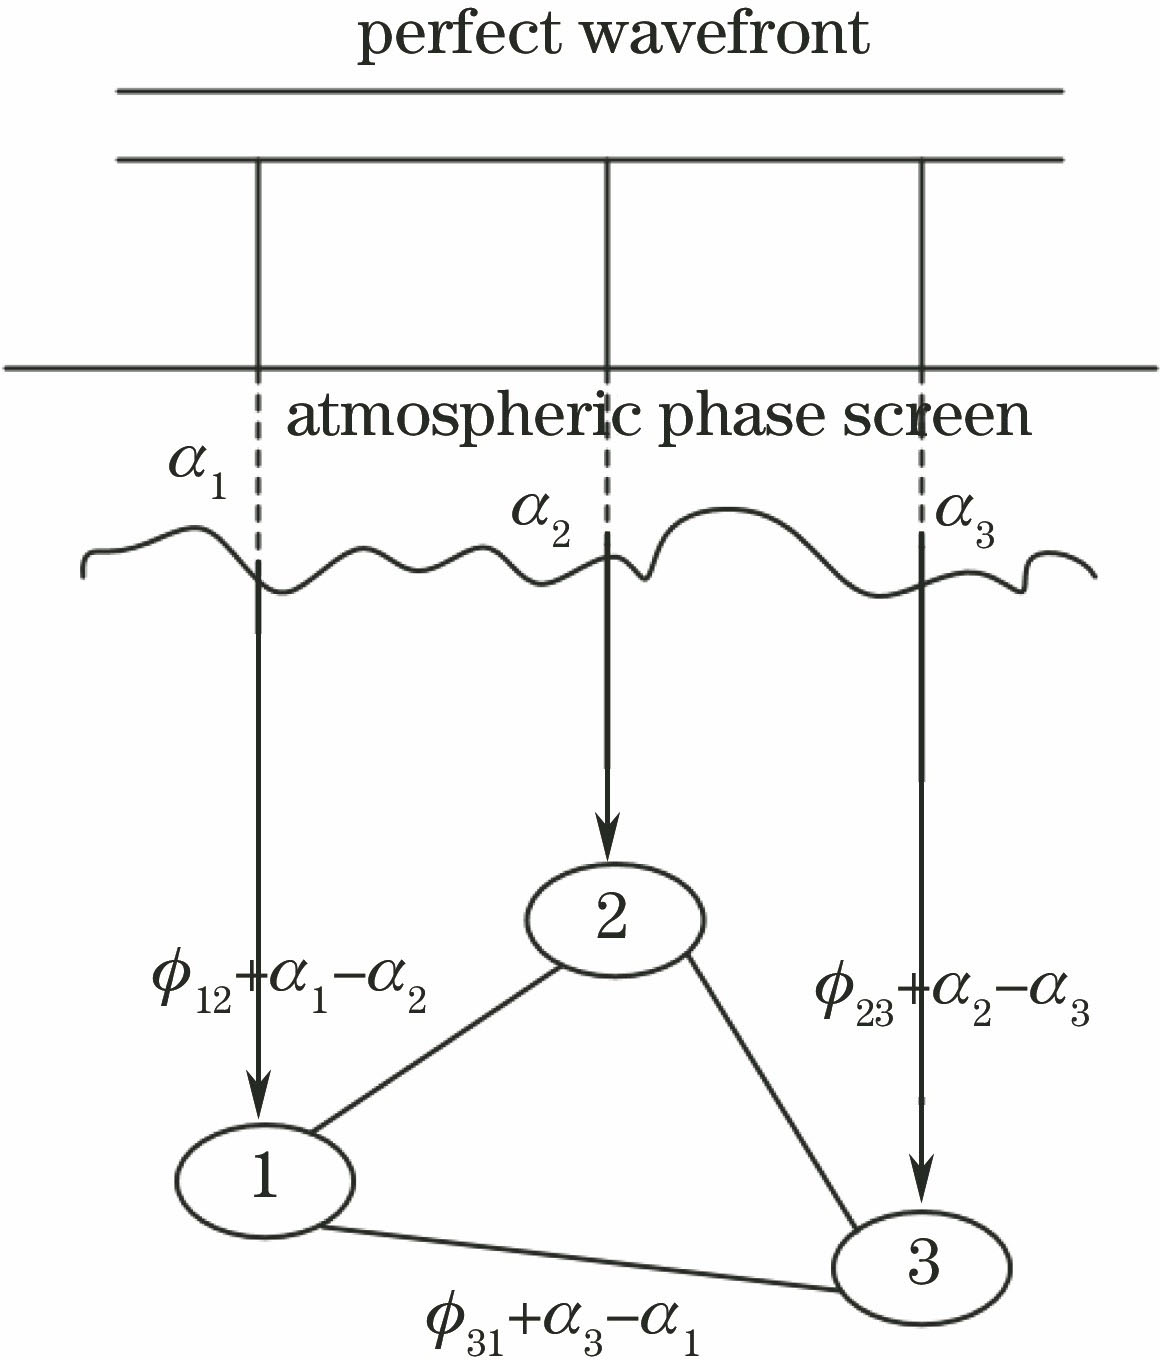 Schematic of closure phase